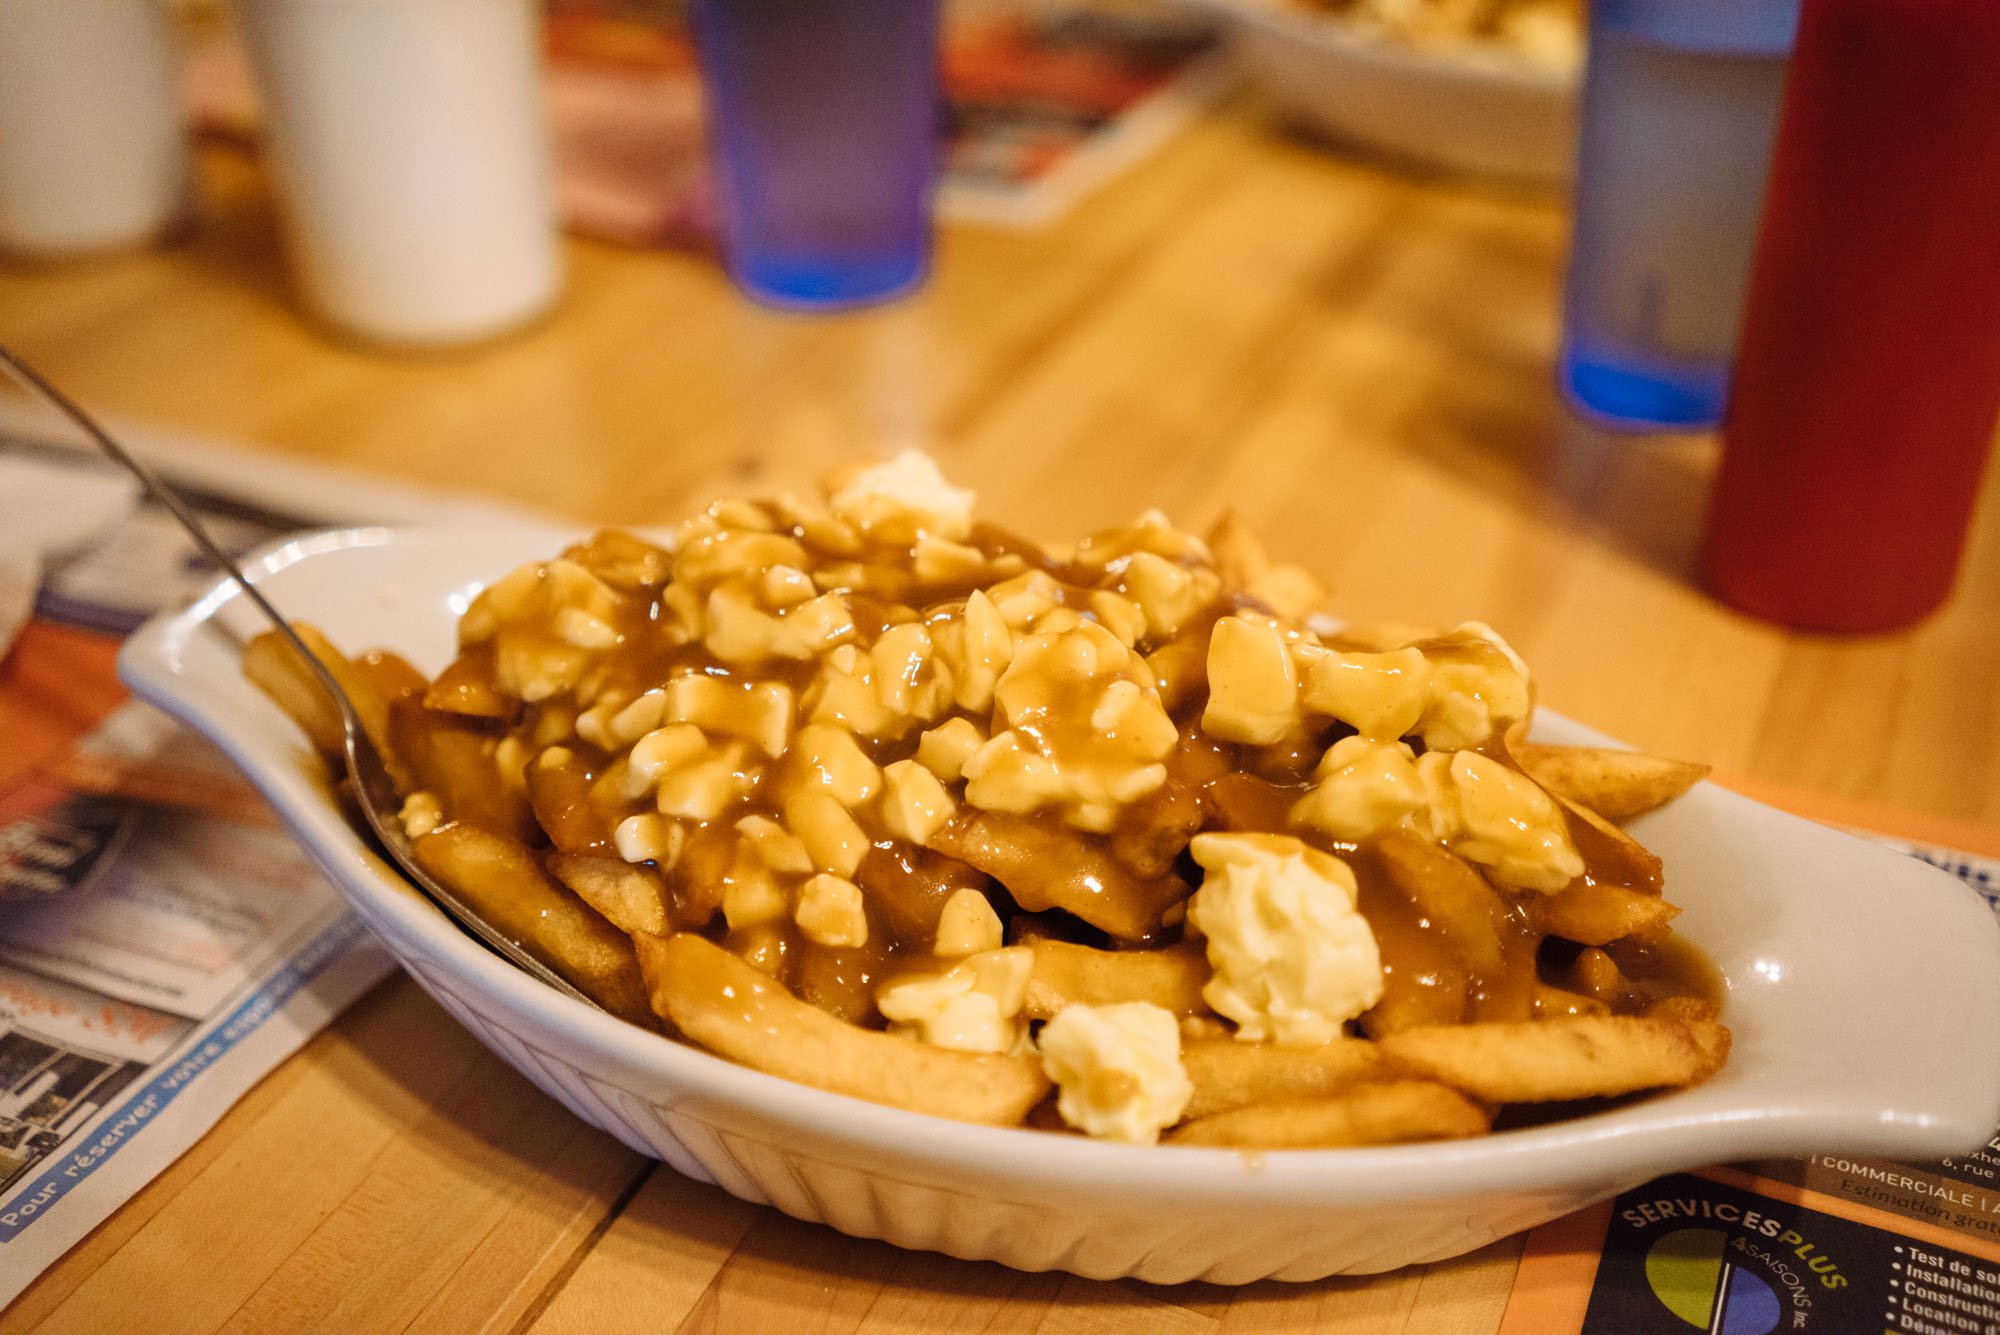  More poutine. Can’t stop, won’t stop! 